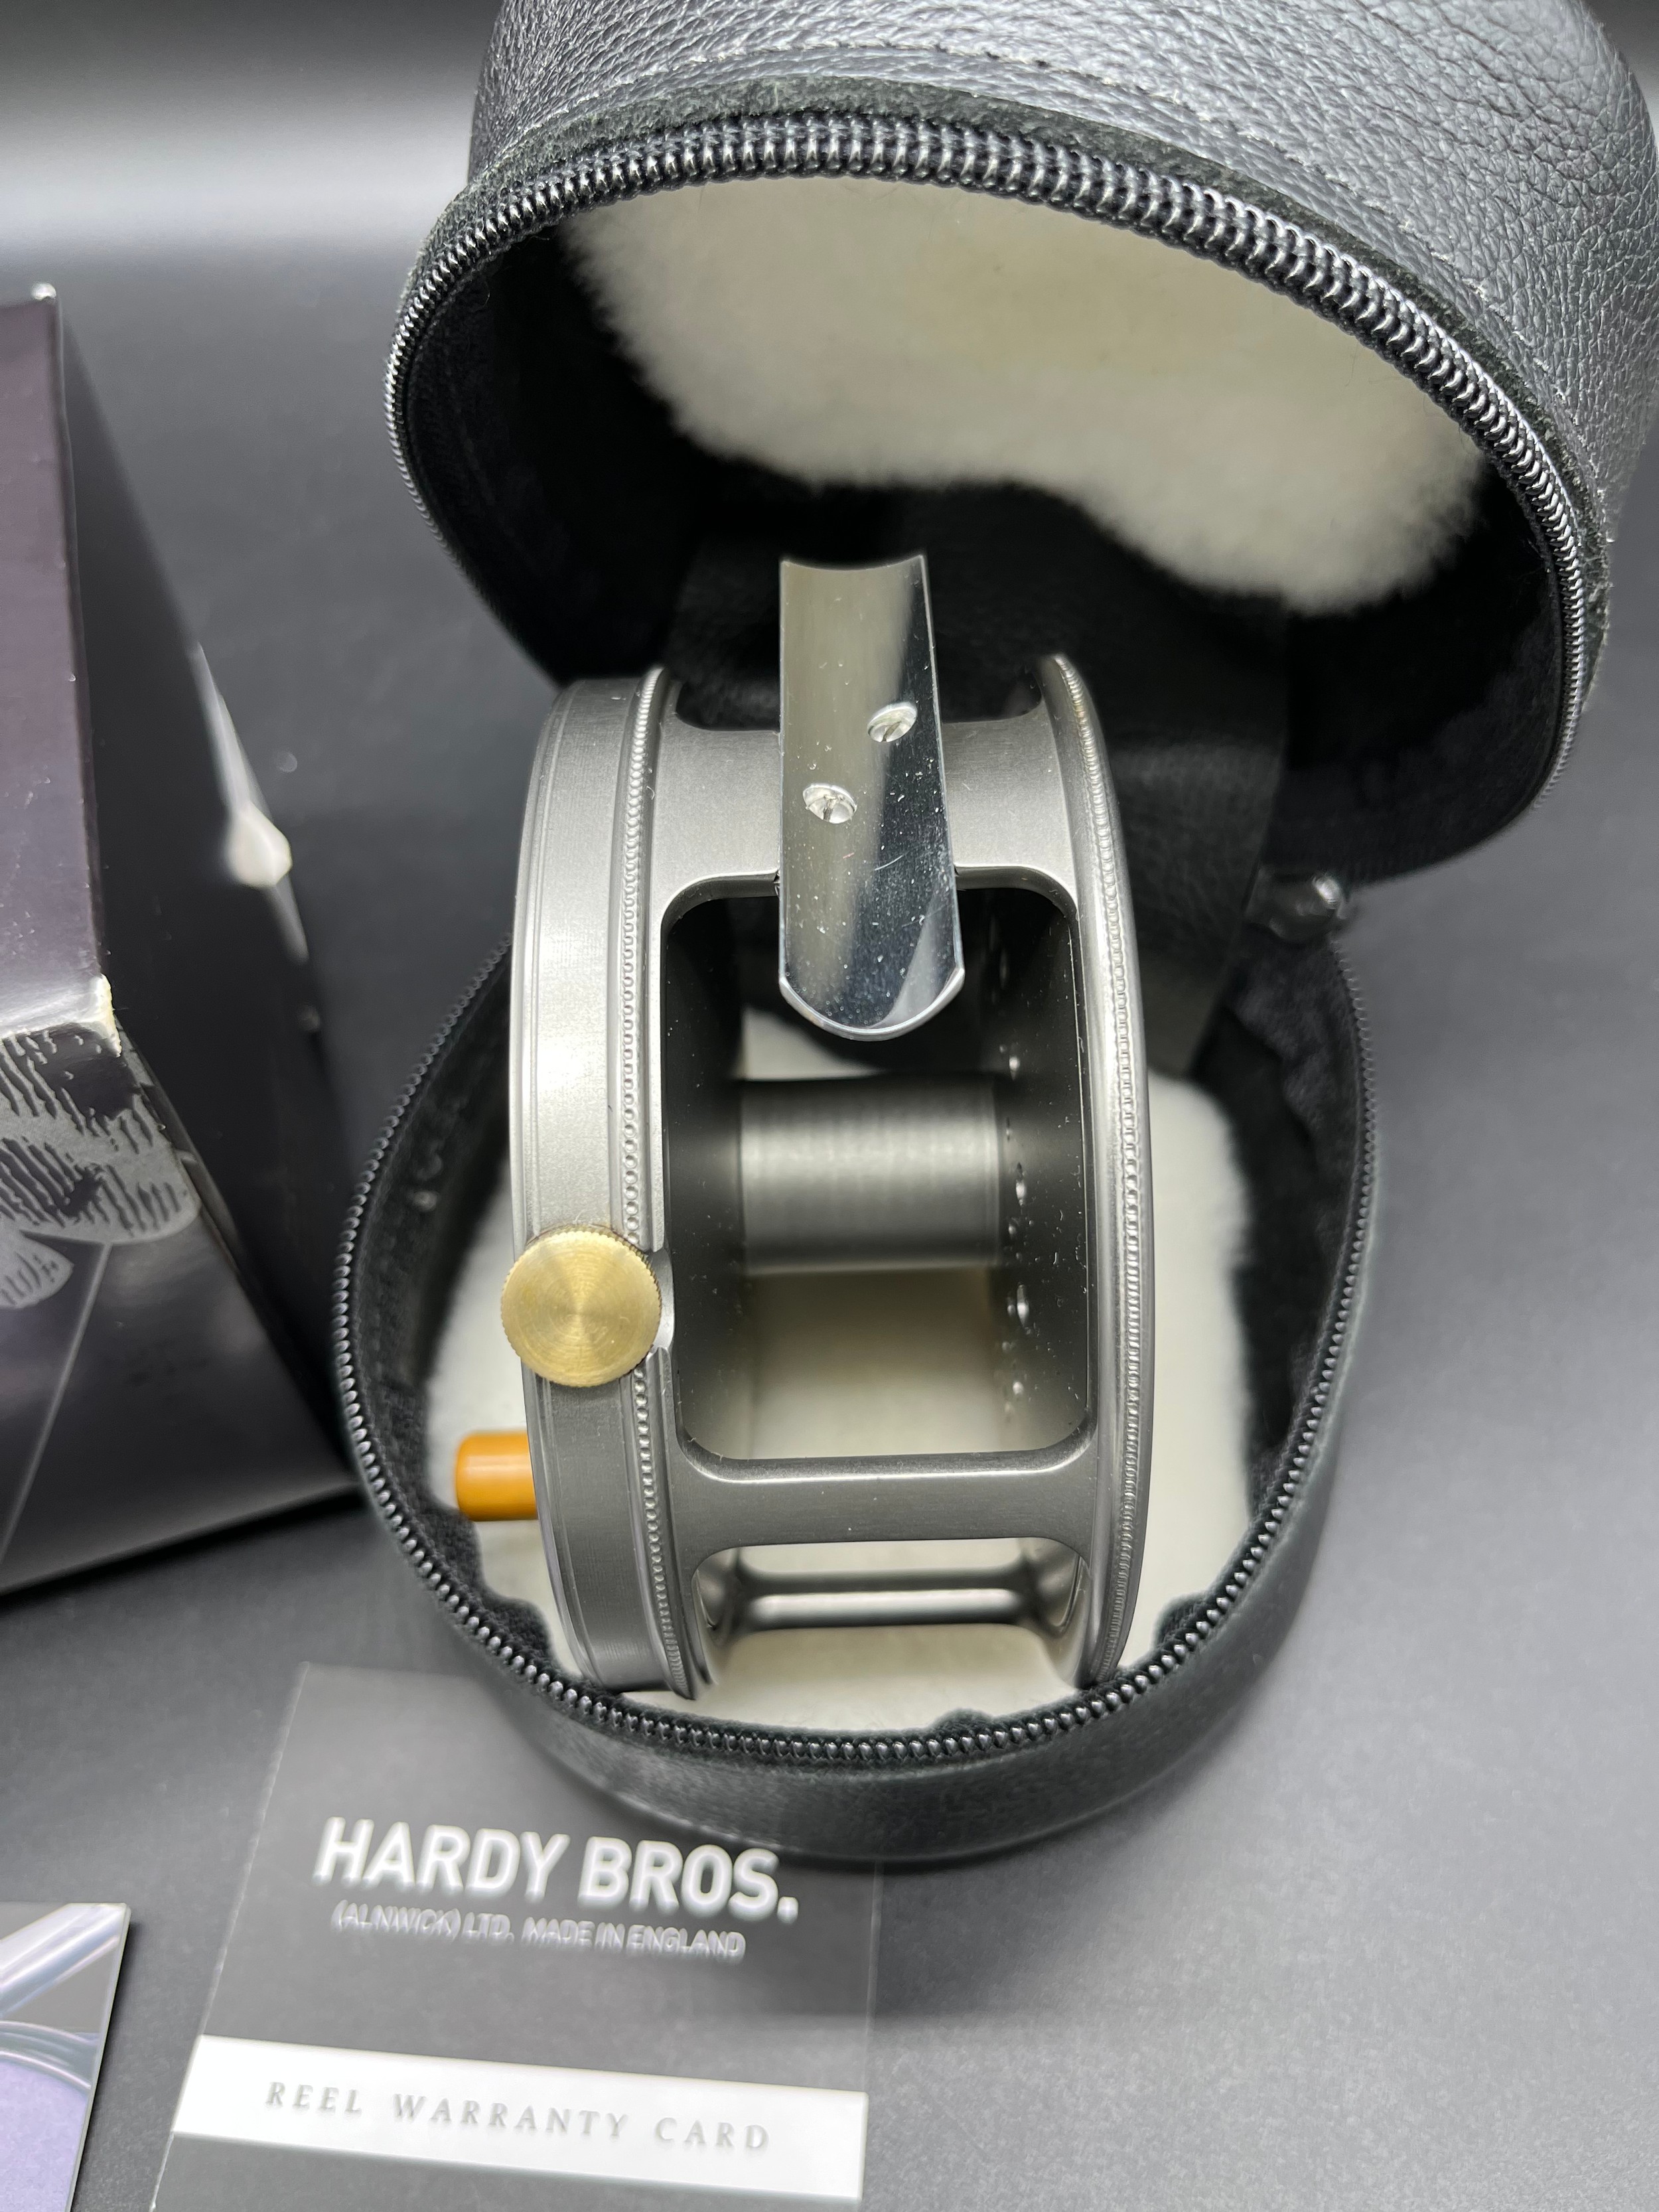 Hardy Bros. The 'Perfect' 4 1/4" Wide Spool fly reel. Mint condition. Comes with bag, box and - Bild 4 aus 6